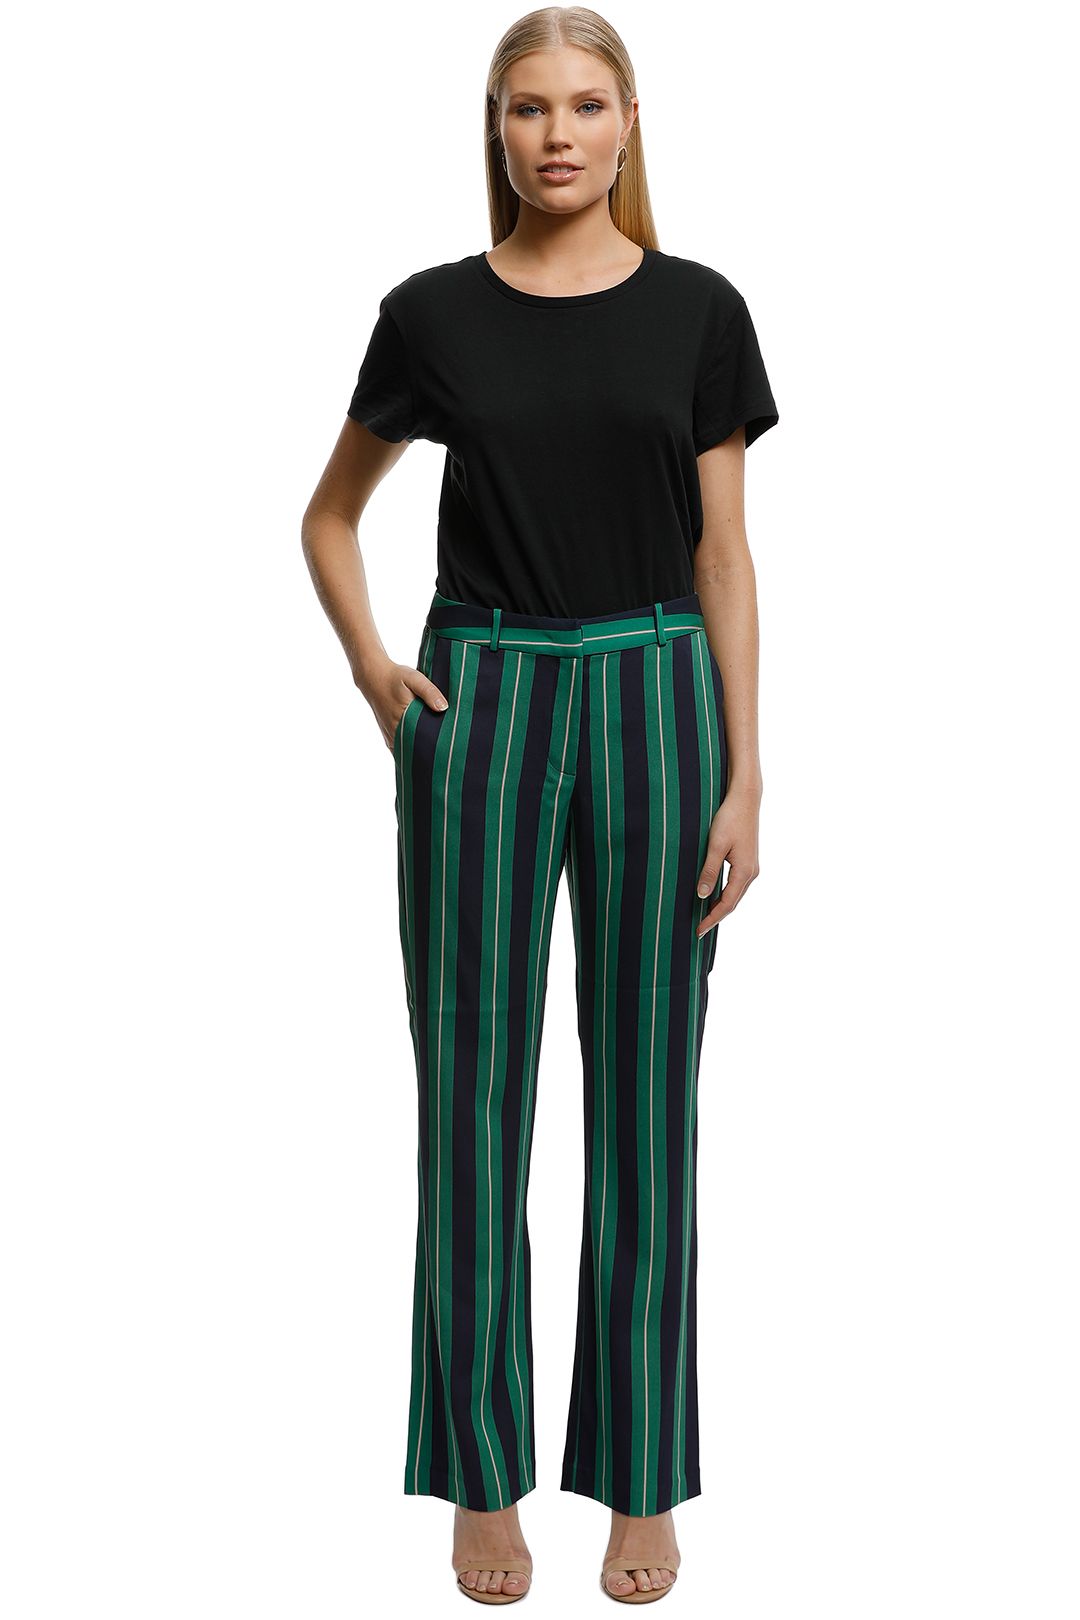 Moss-and-Spy-Gatsby-Pant-Green-Stripe-Front